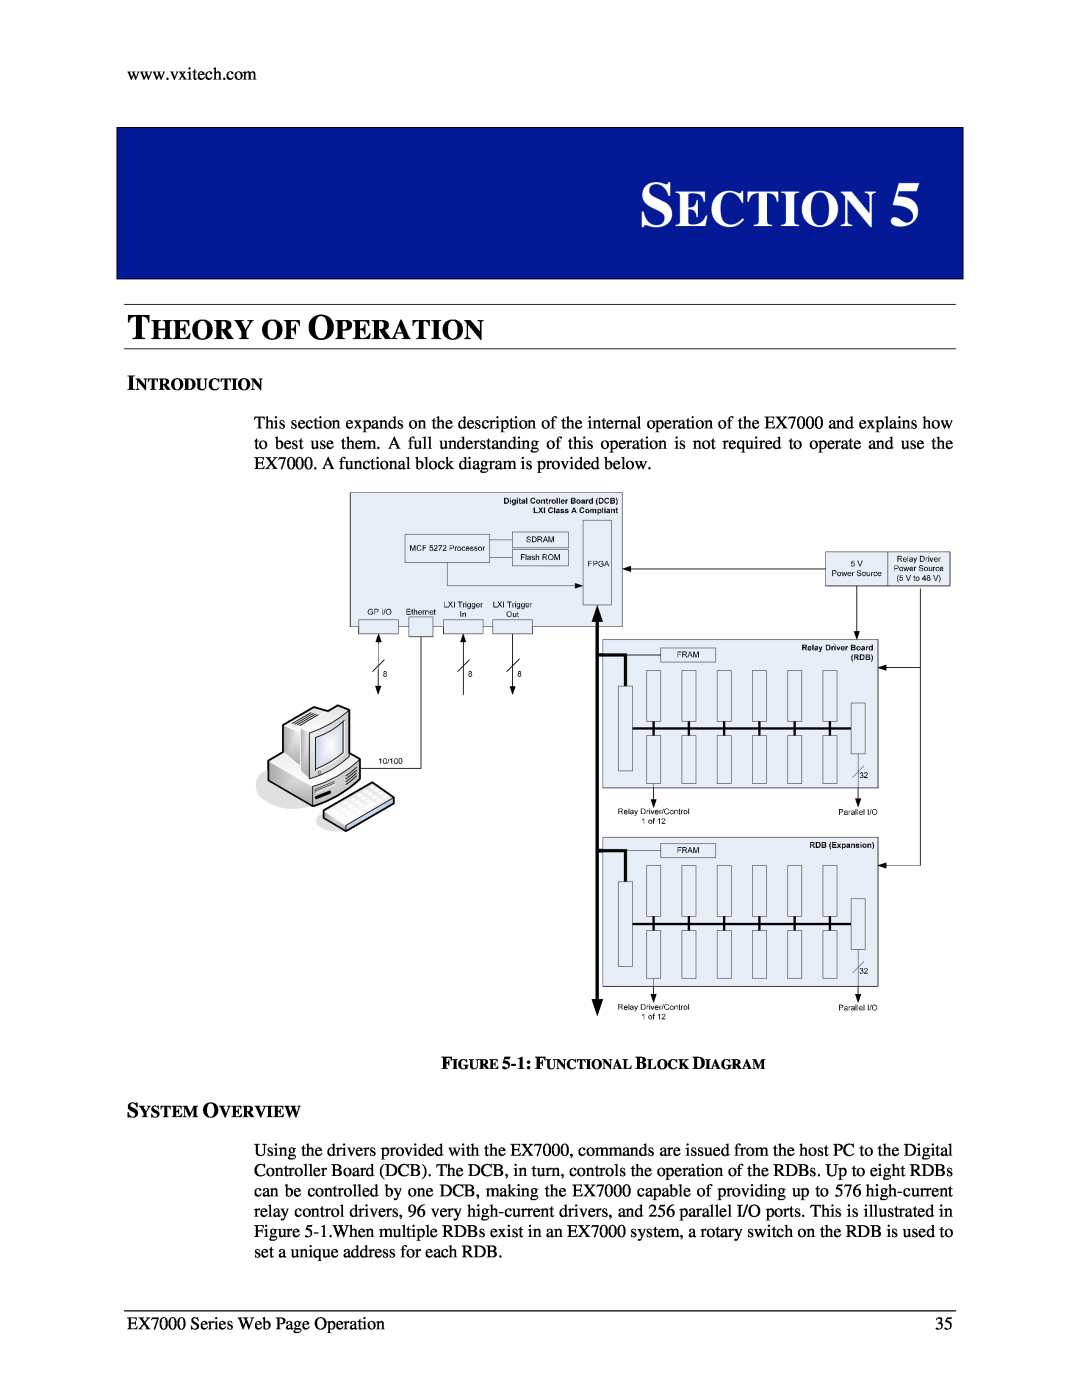 VXI EX7000 user manual Theory Of Operation, System Overview, Section, Introduction, 1 FUNCTIONAL BLOCK DIAGRAM 